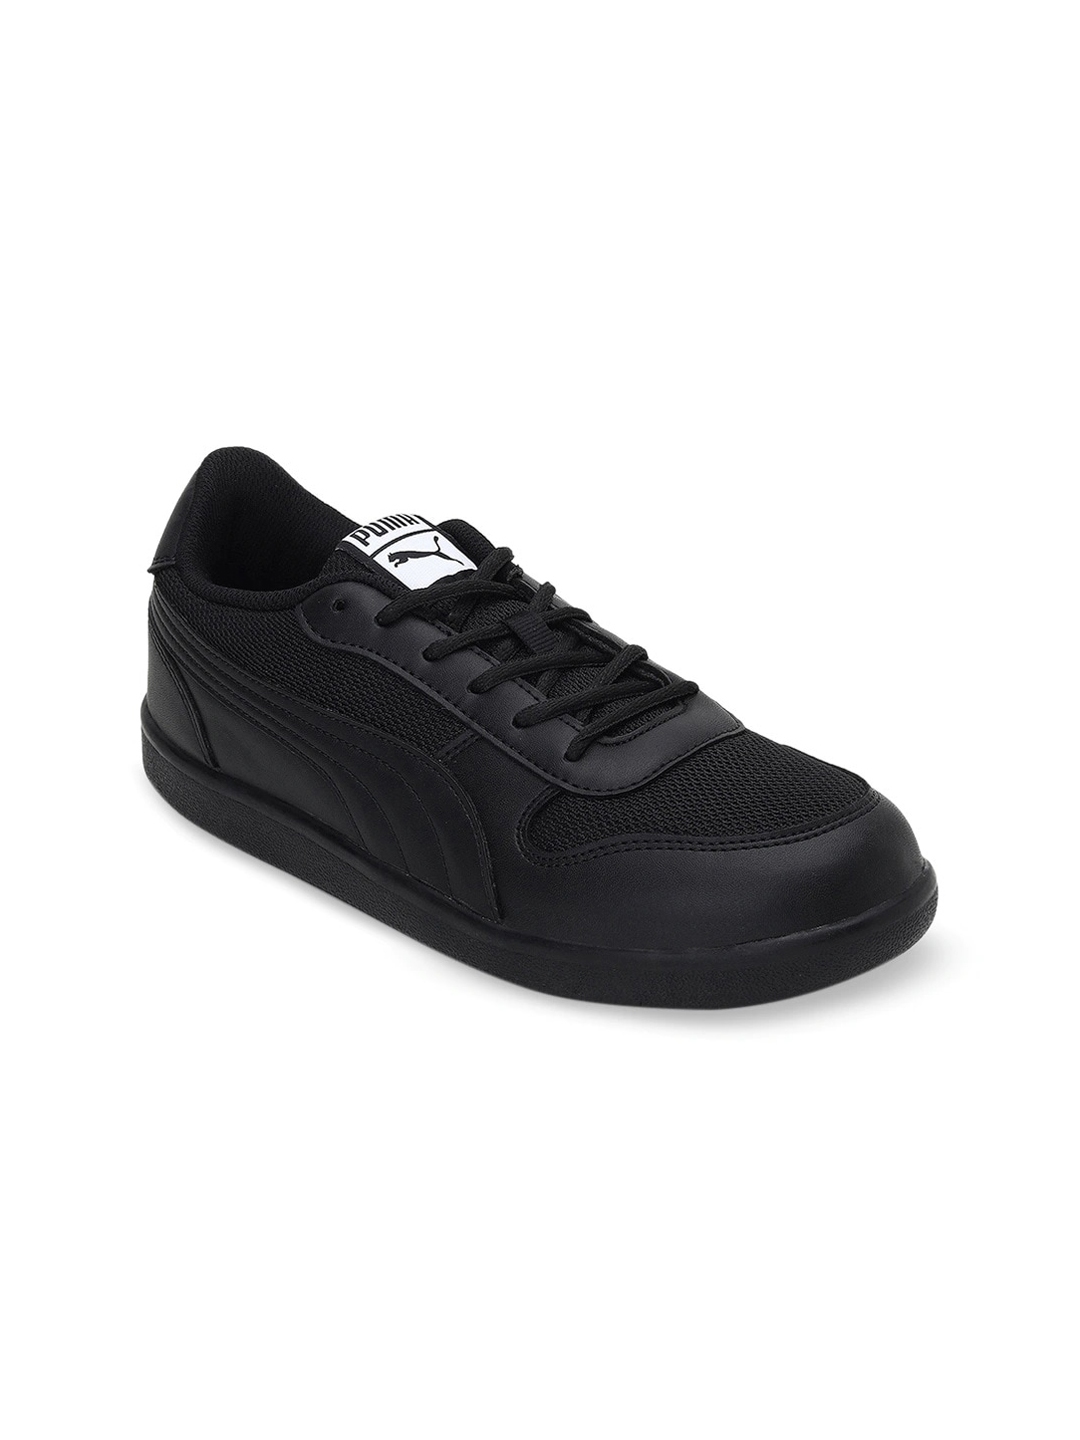 Buy Puma Black Solid Punch Sneakers Casual Shoes - Casual Shoes for ...